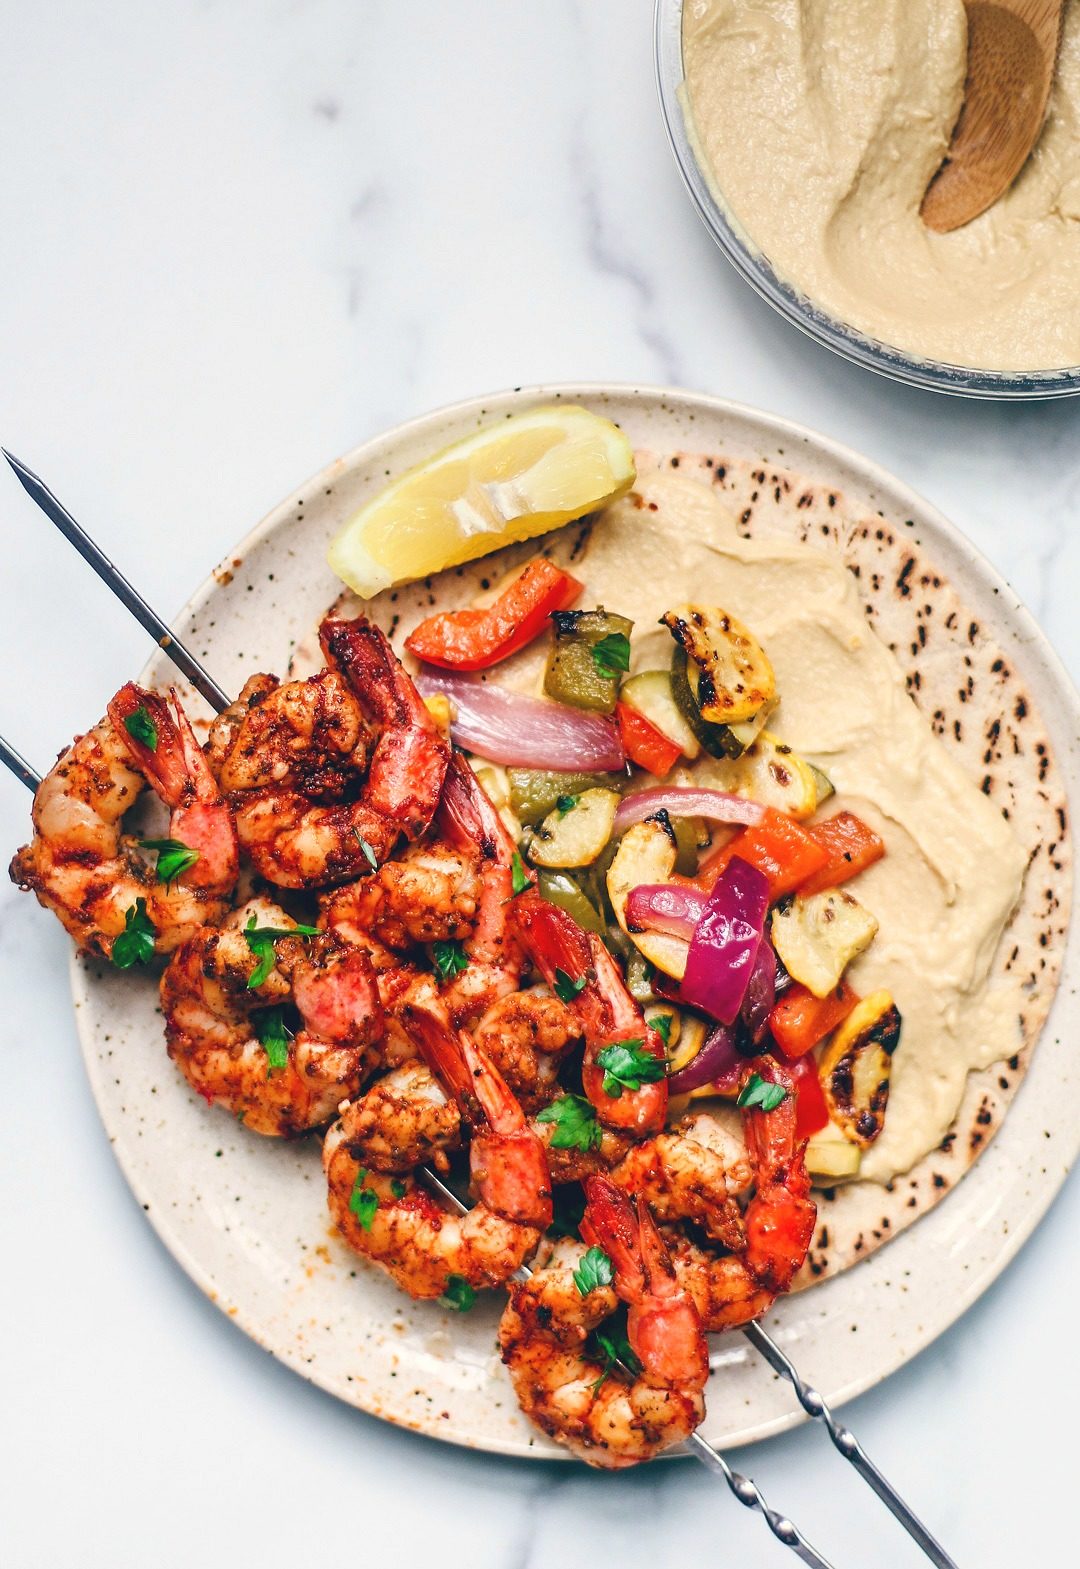 Grilled shrimp on a plate with veggies, pita, and hummus.